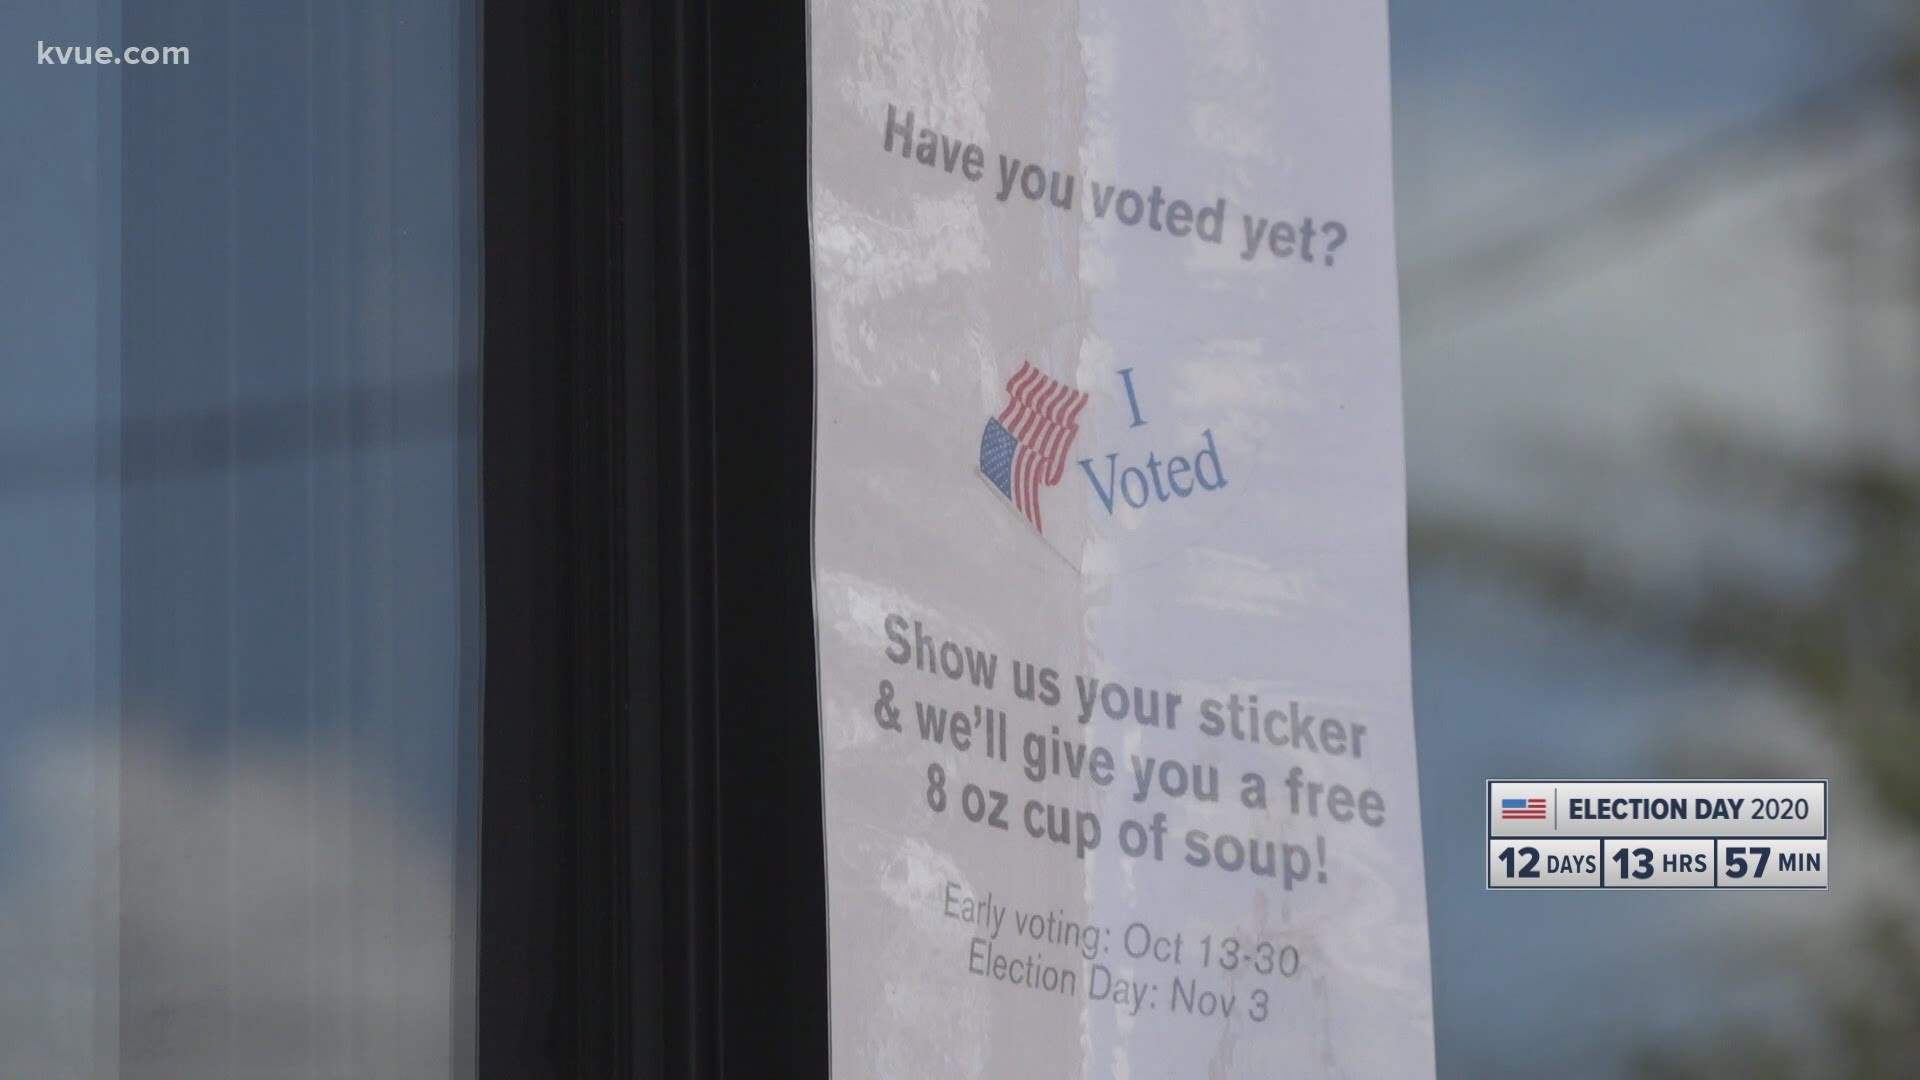 Some local business owners are offering incentives for voting. In return, customers are giving businesses a much-needed boost.